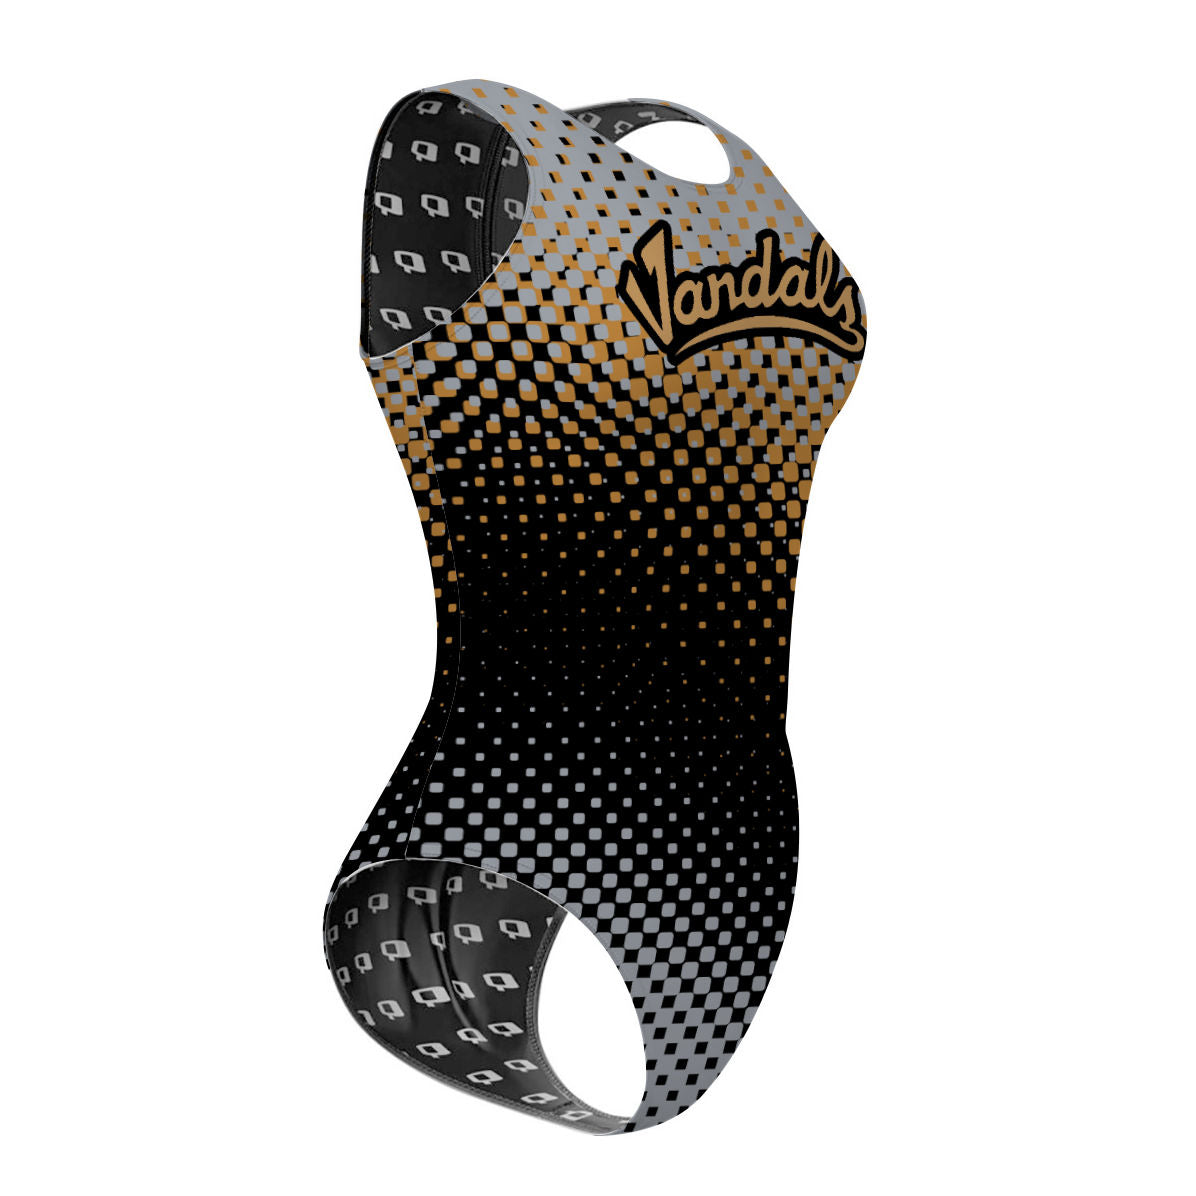 Vandals 23 V3 - Women's Waterpolo Swimsuit Classic Cut